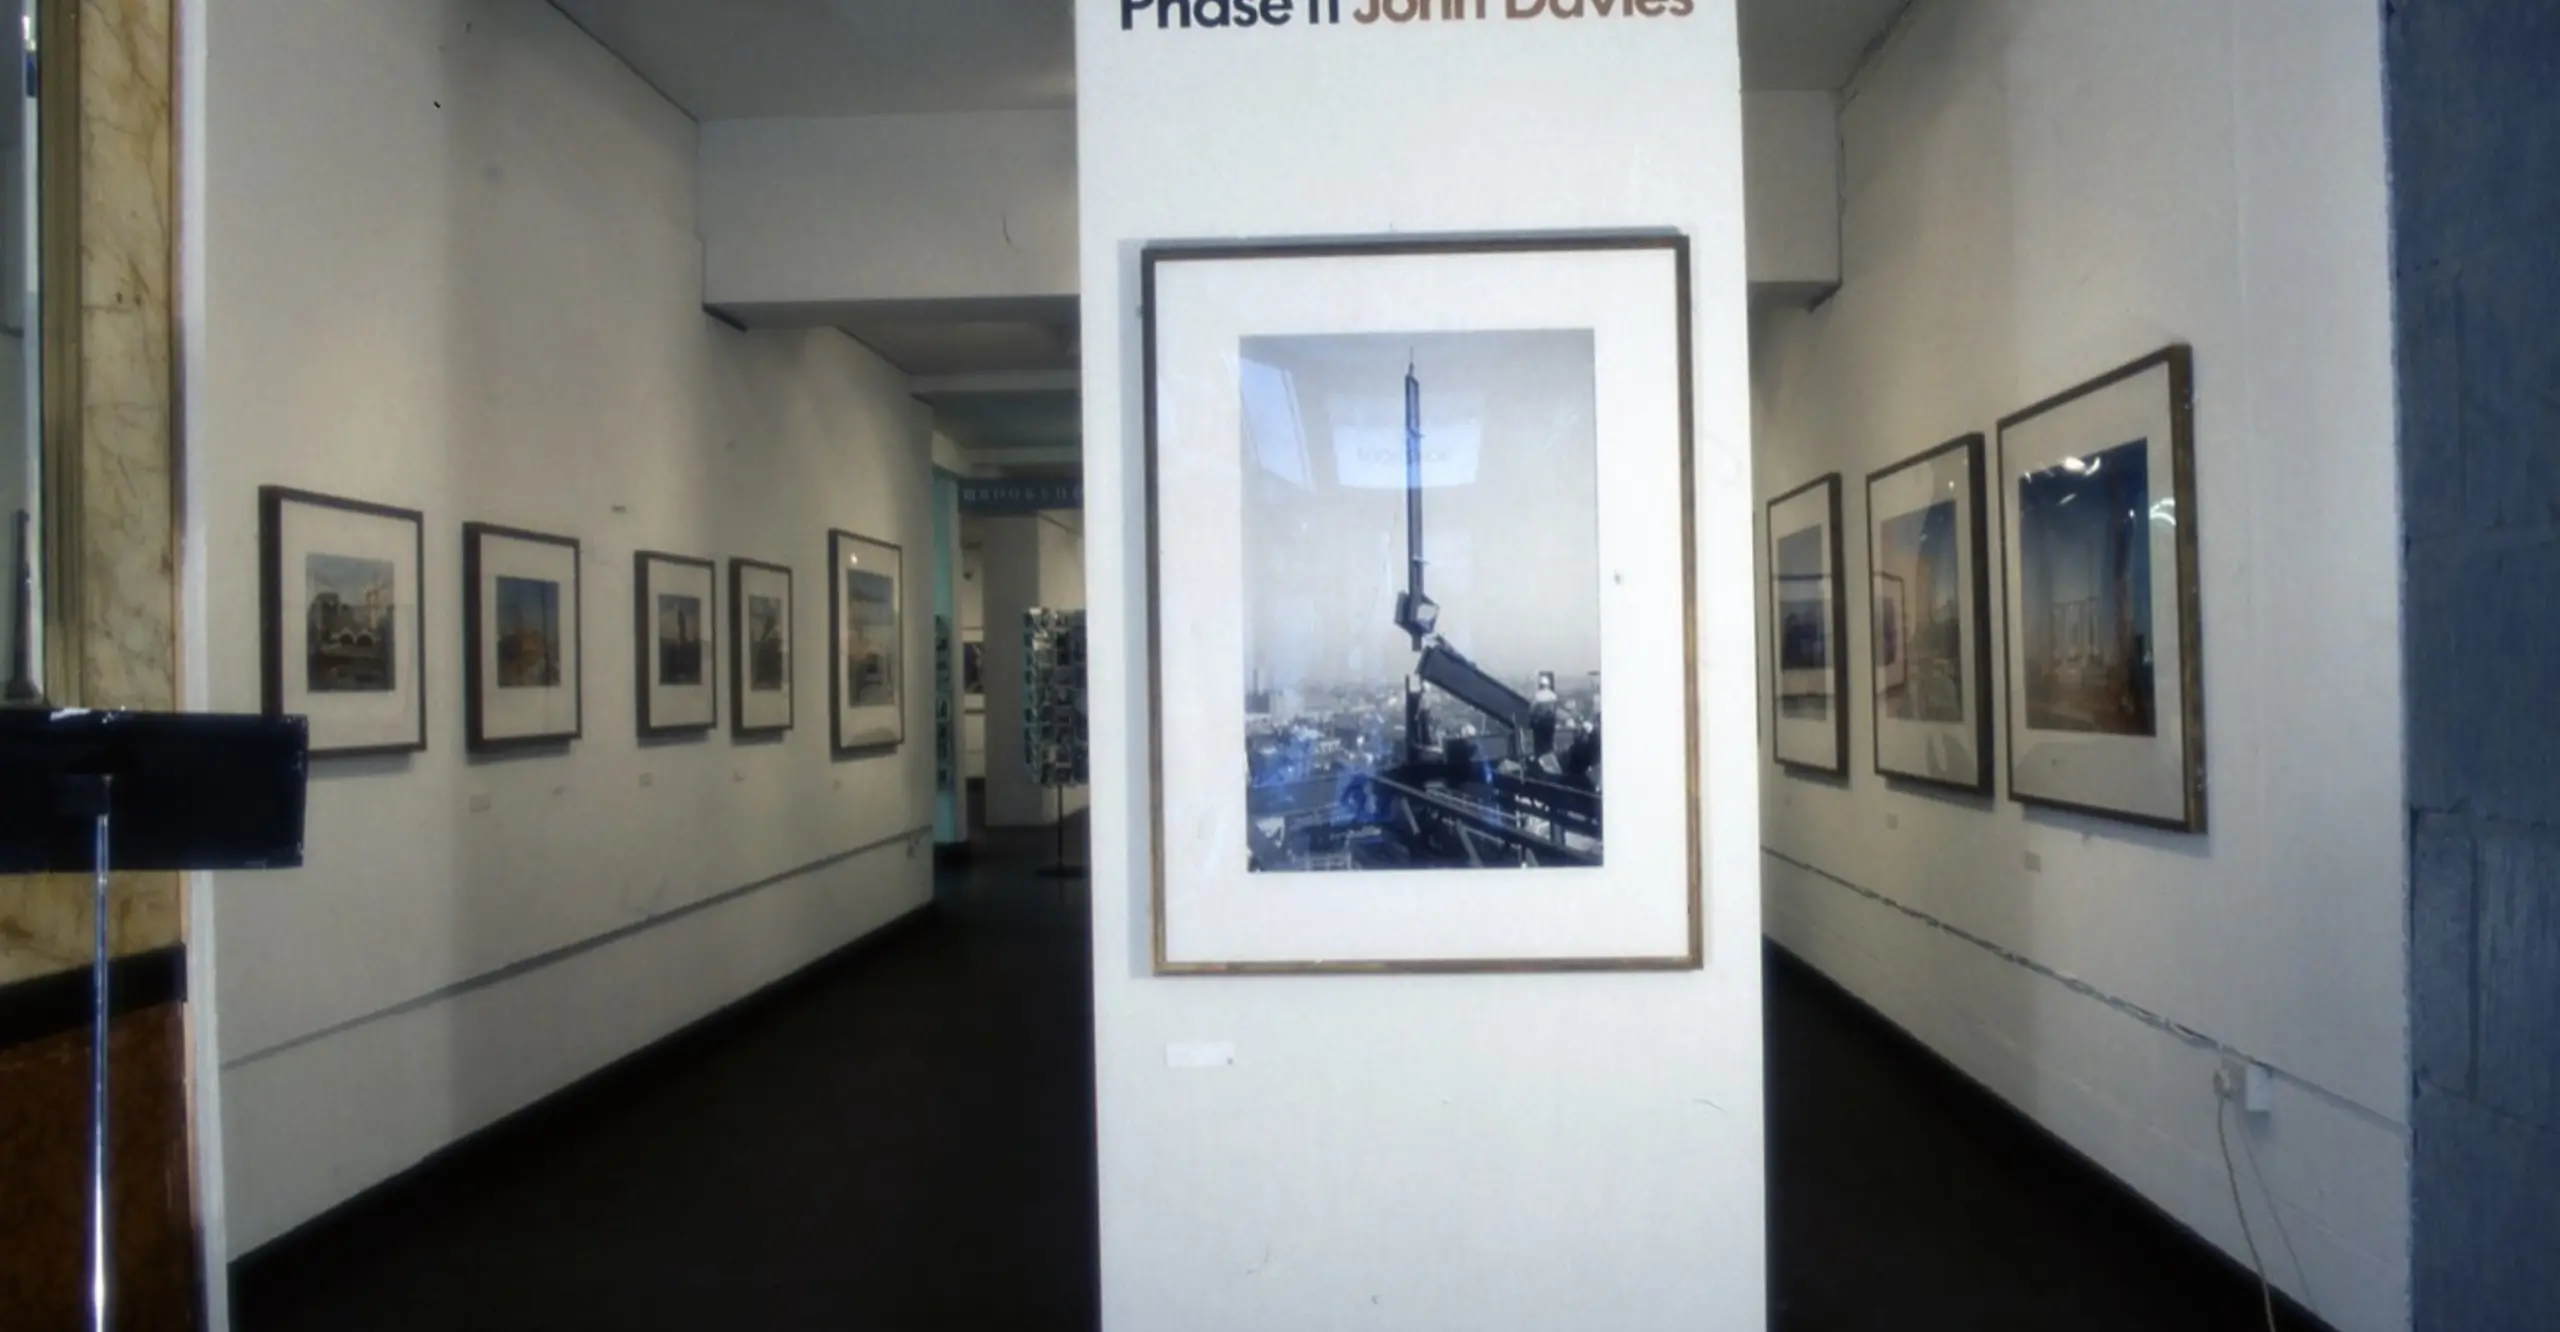 Installation image - Phase 11: John Davies. Courtesy The Photographers&#039; Gallery Archive 1991